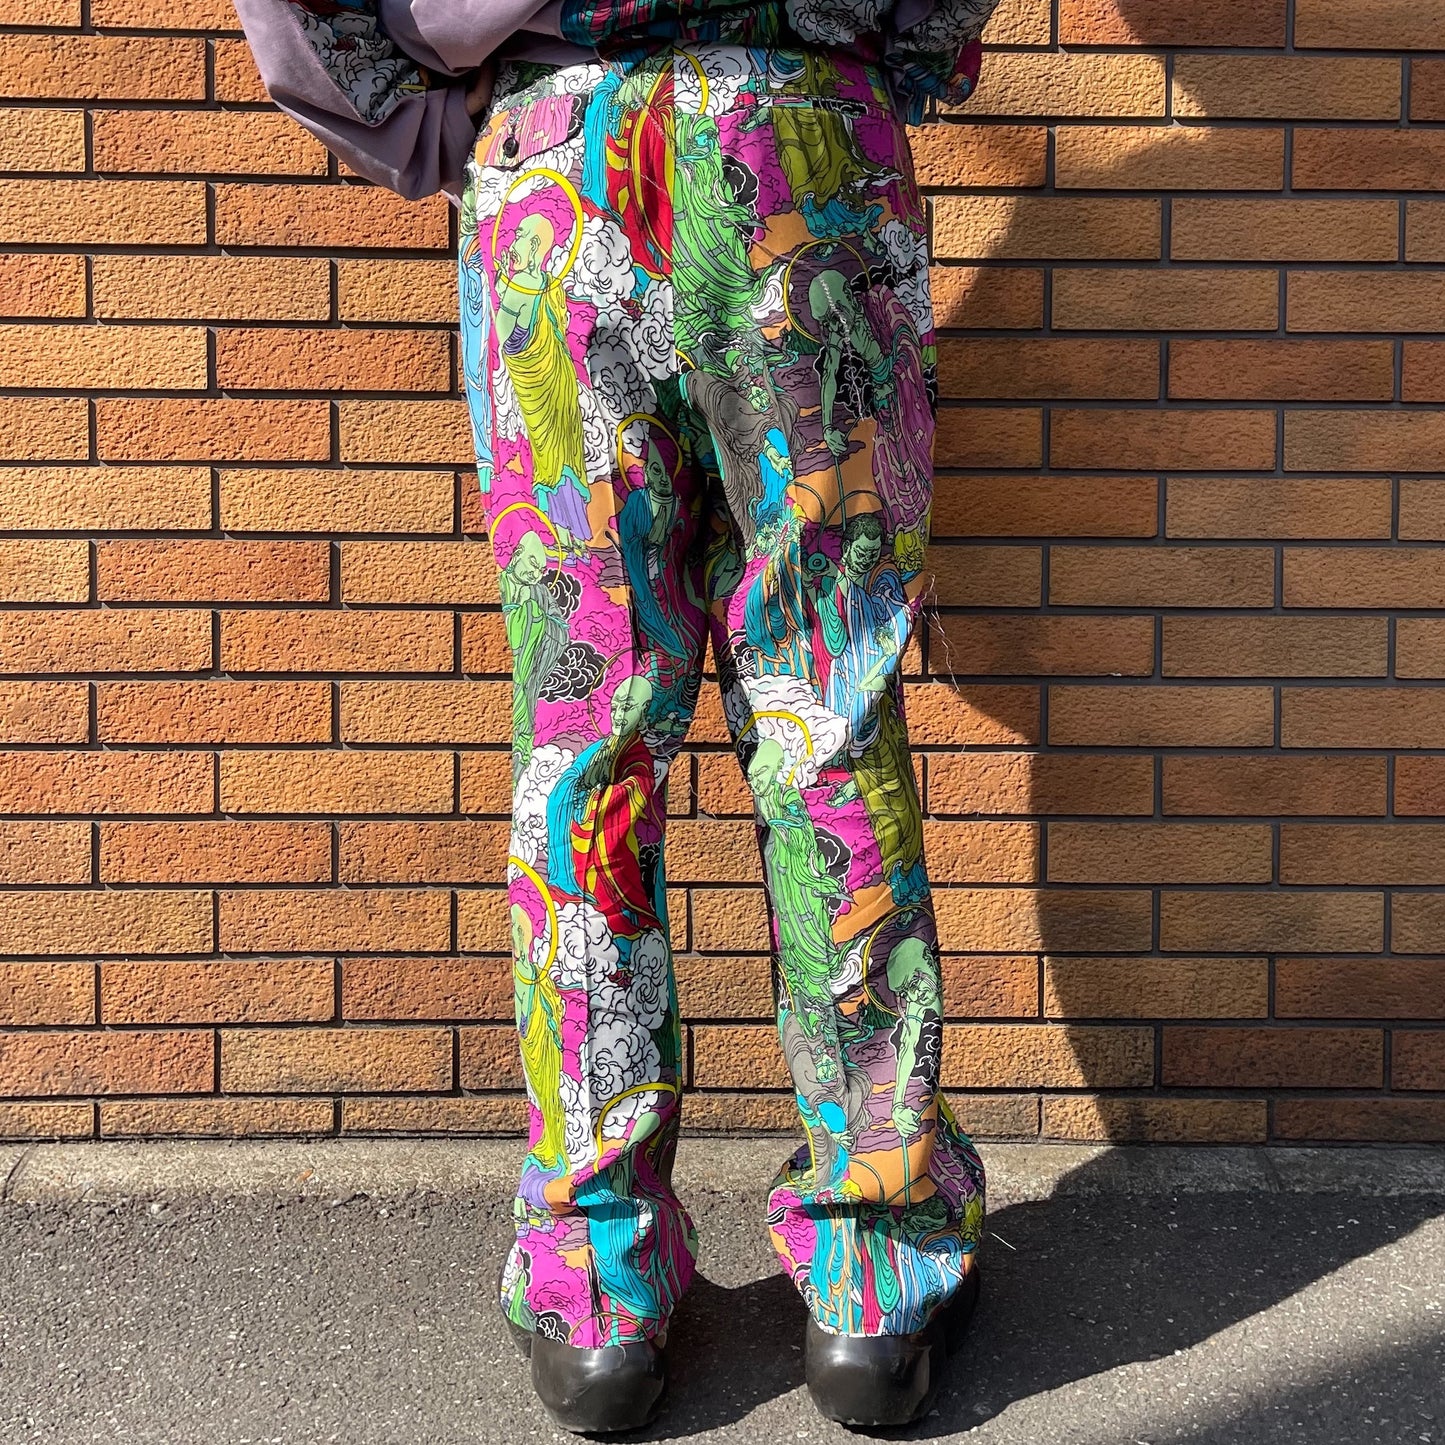 INVERTED TUCK TROUSERS / BUDDHA / プリントタックトラウザー